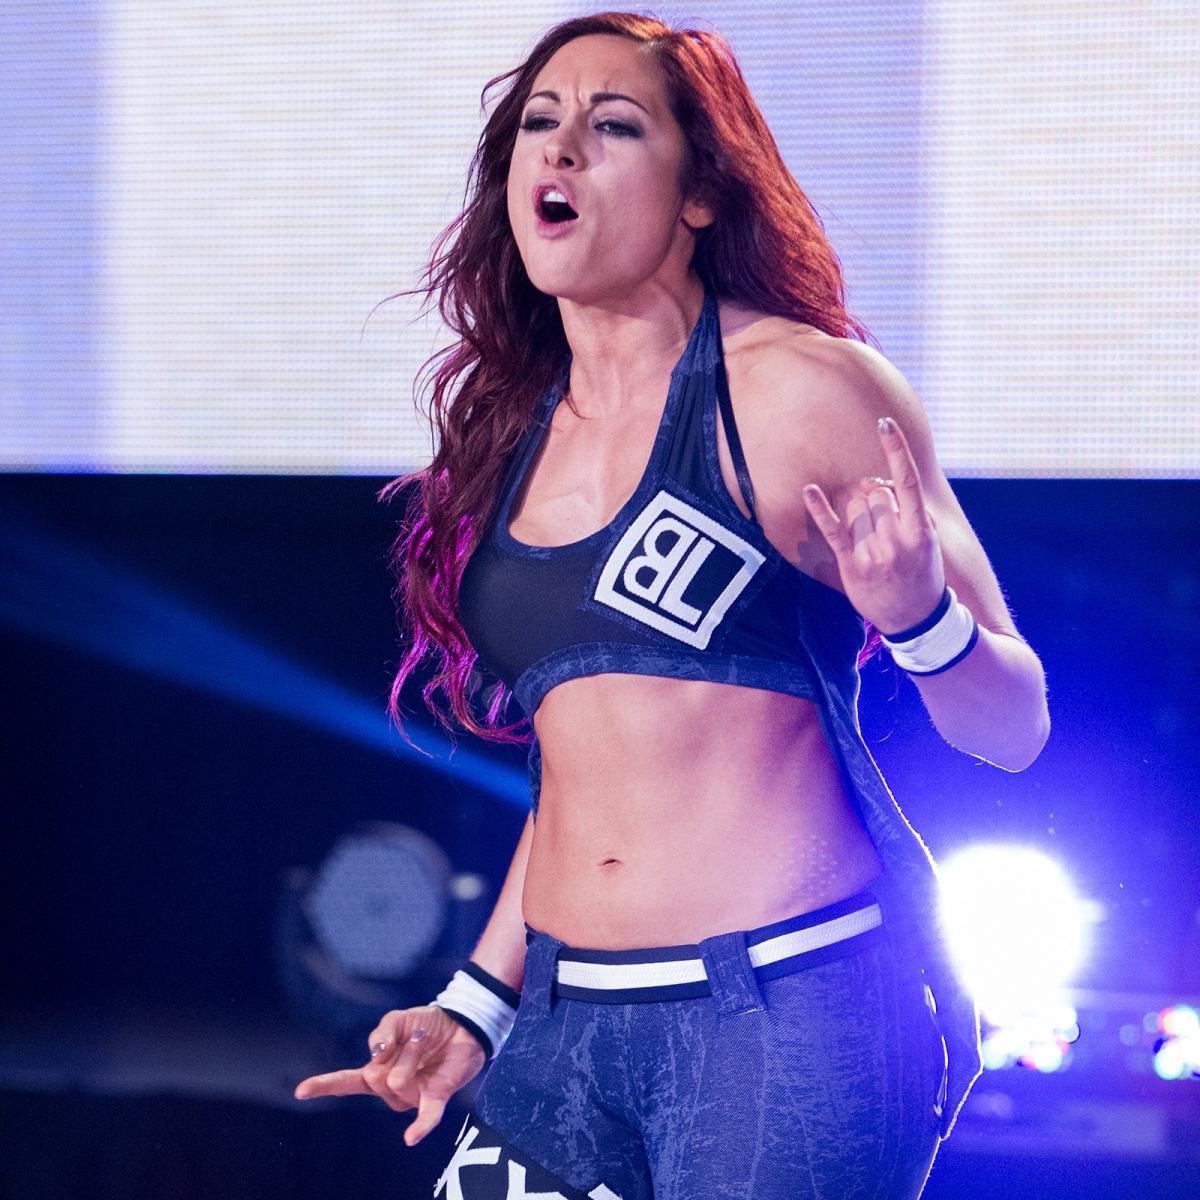 Day 83 of missing Becky Lynch from our screens!